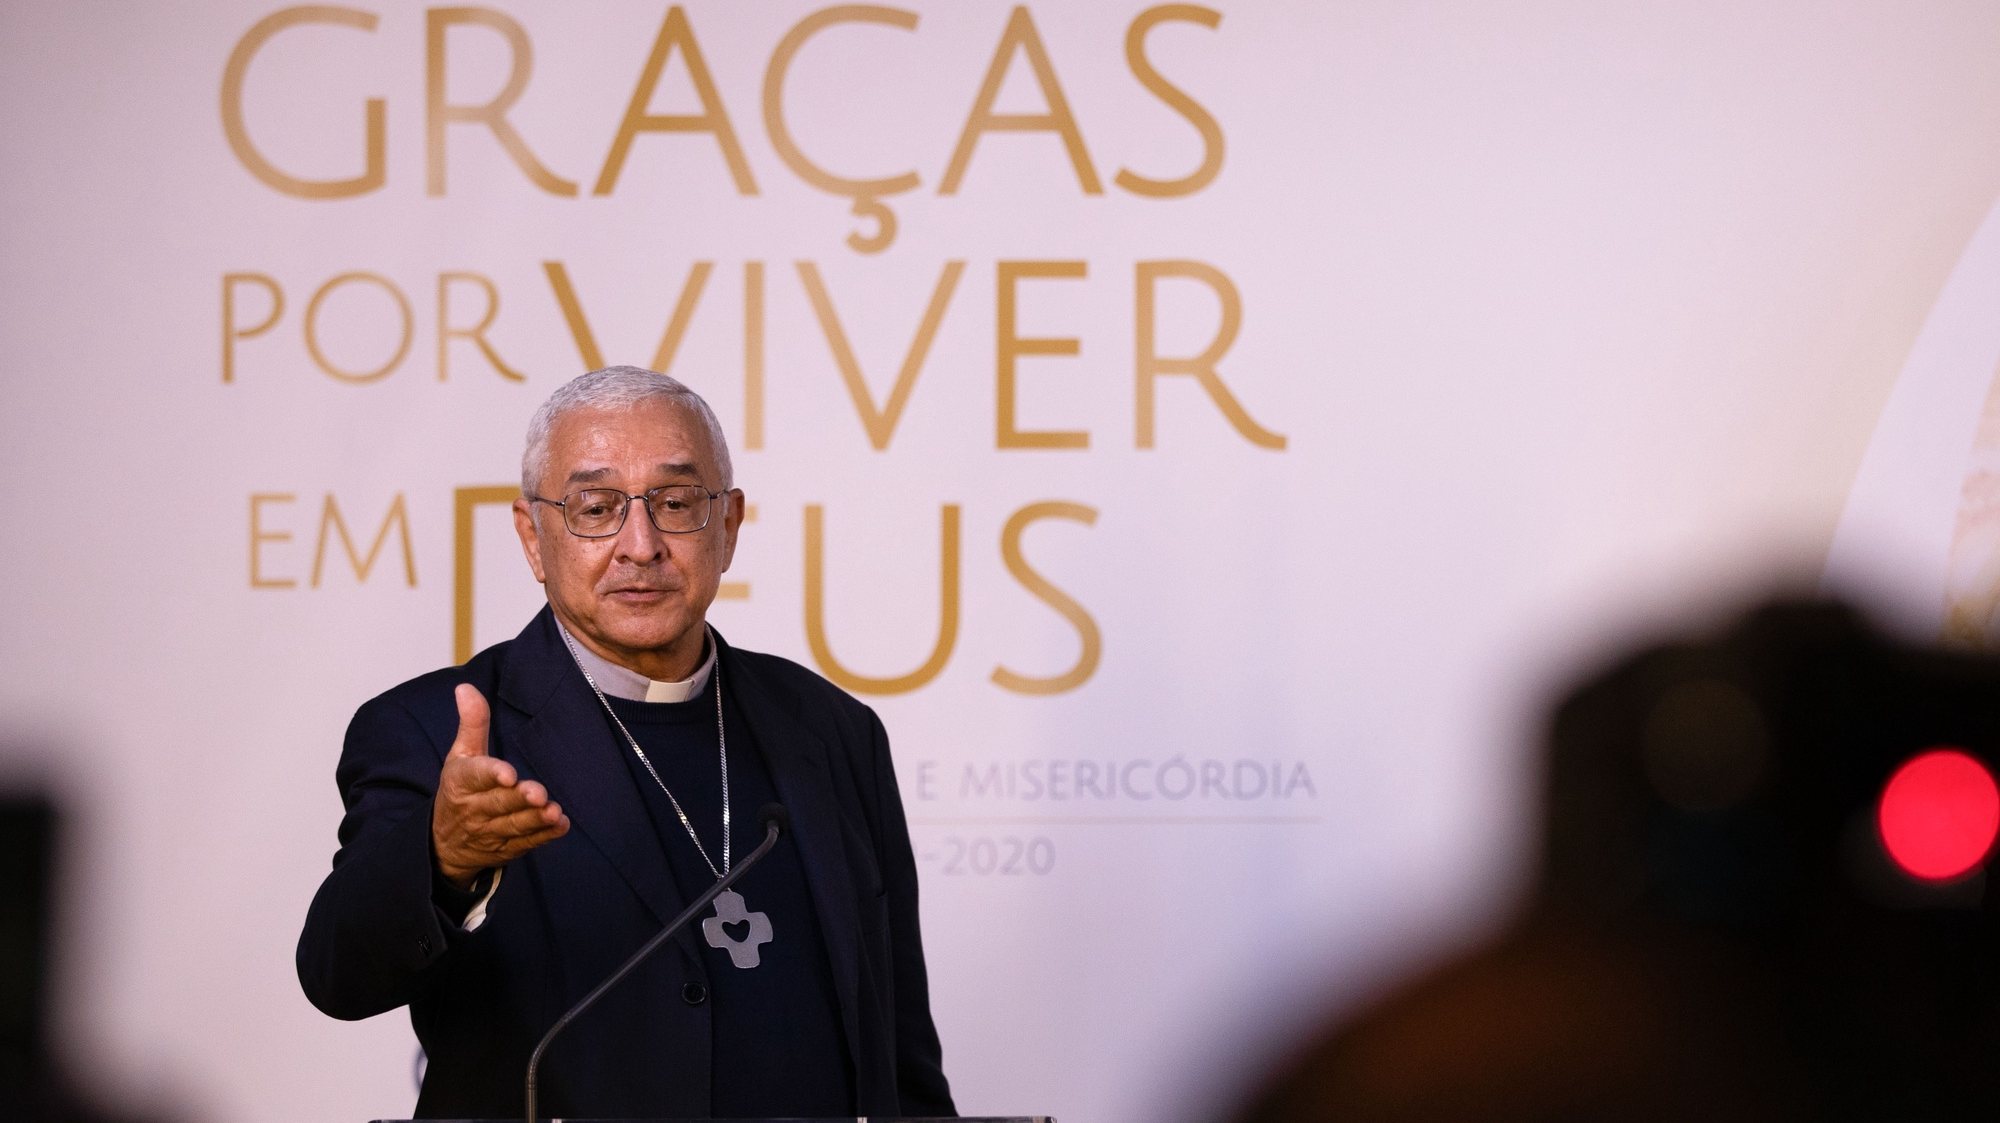 The Bishop Jose Ornelas talks to the journalists during a press conference in the Shrine of Fatima, Portugal, October 12, 2020. According to the plan already approved by the Directorate General of Health, the October pilgrimage will be subject to strong restrictions, not allowing more than six thousand people to enter the enclosure as a prevention measure against the covid-19 pandemic. PAULO CUNHA /LUSA